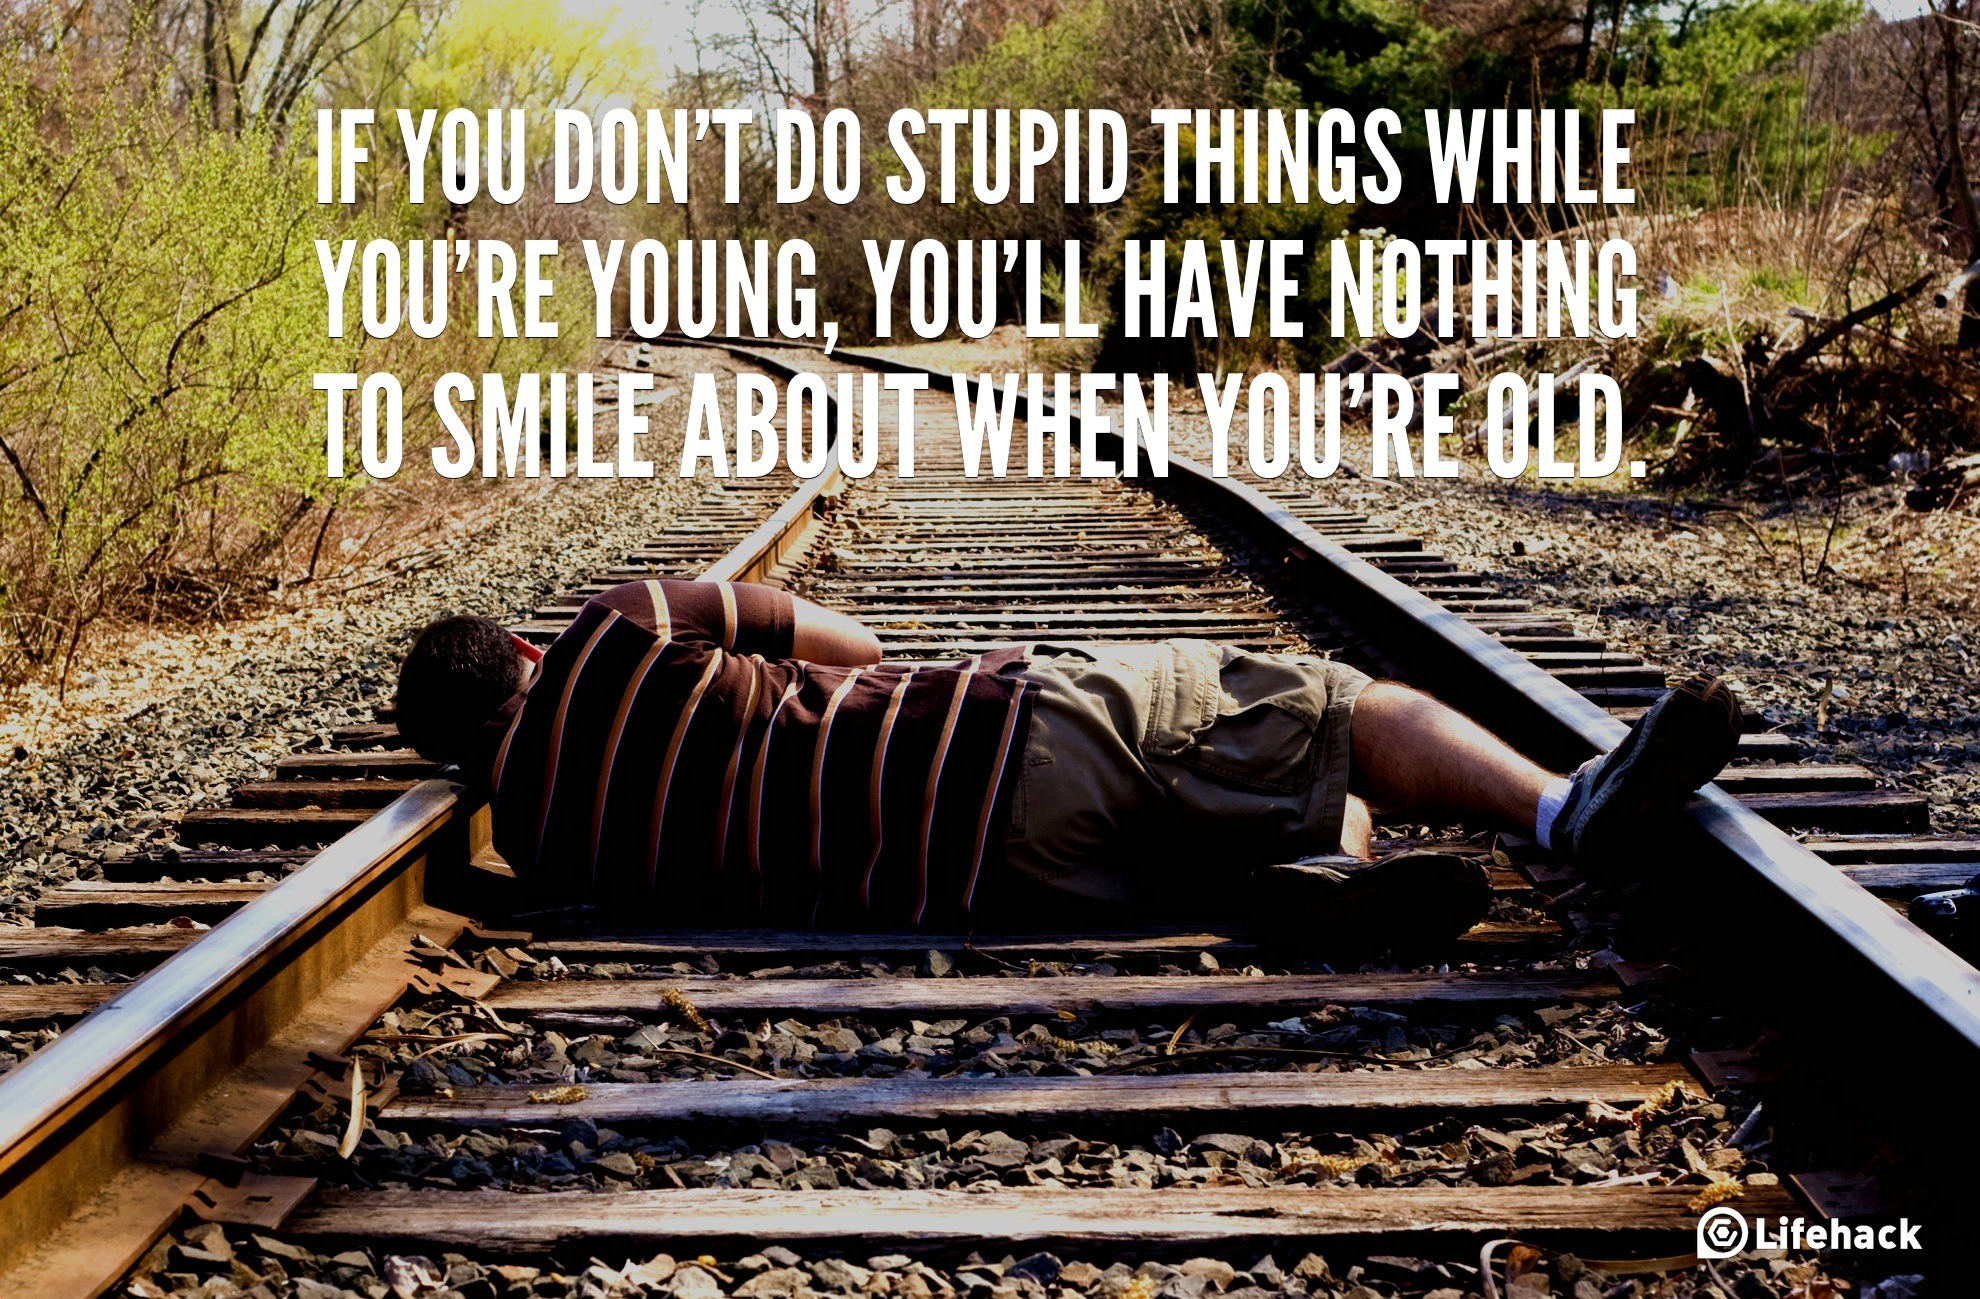 30sec Tip: Do Stupid Things while You’re Young